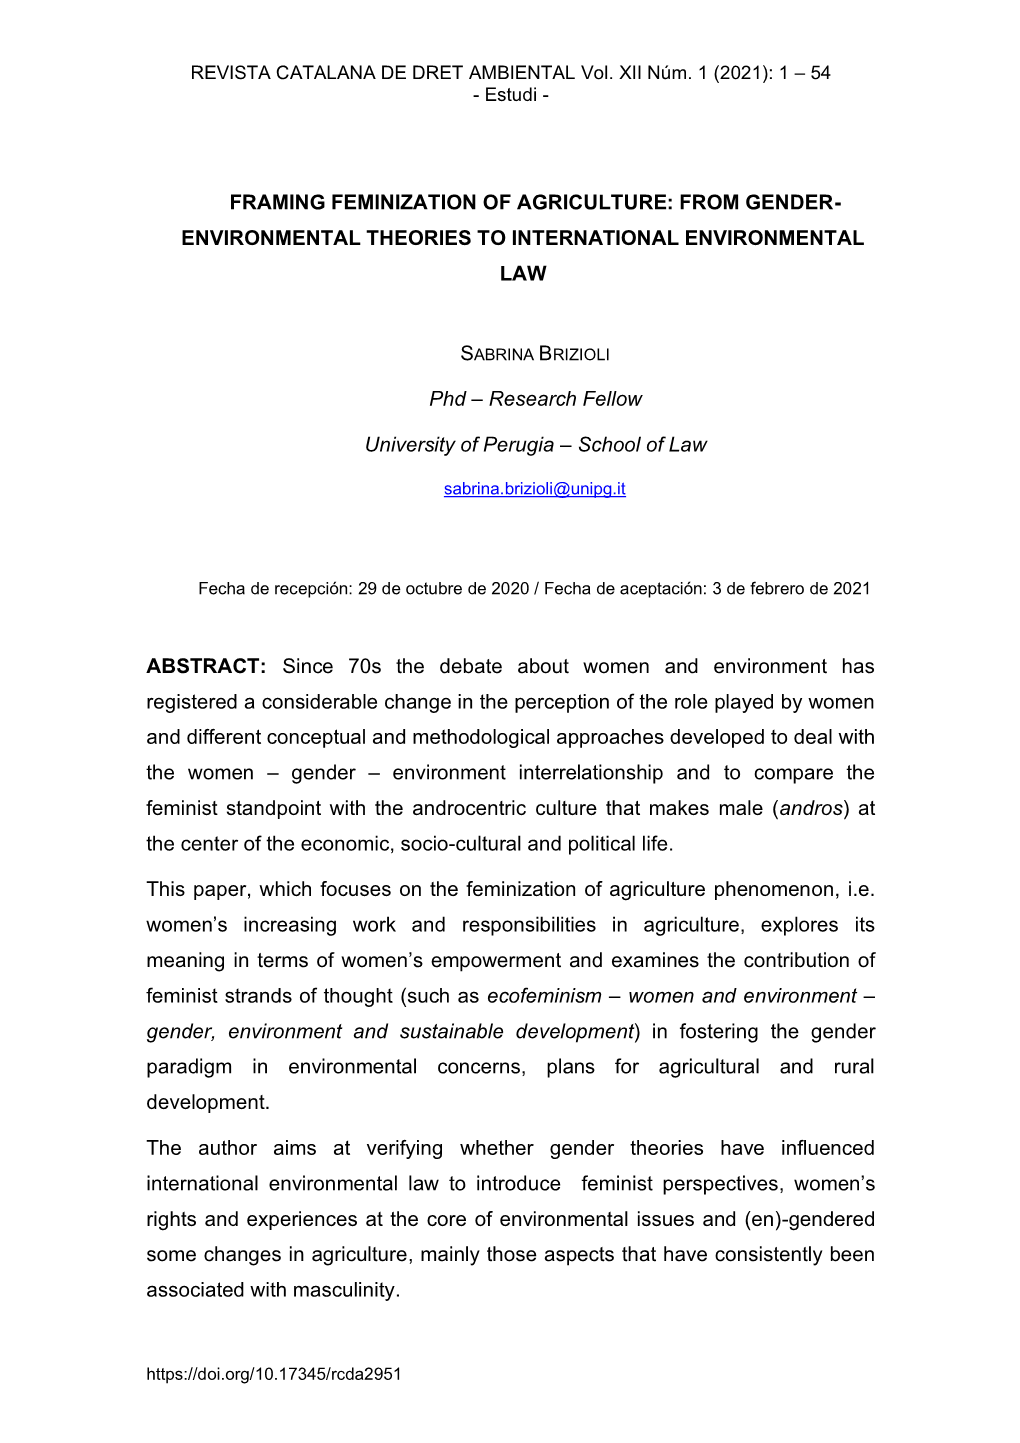 Framing Feminization of Agriculture: from Gender- Environmental Theories to International Environmental Law